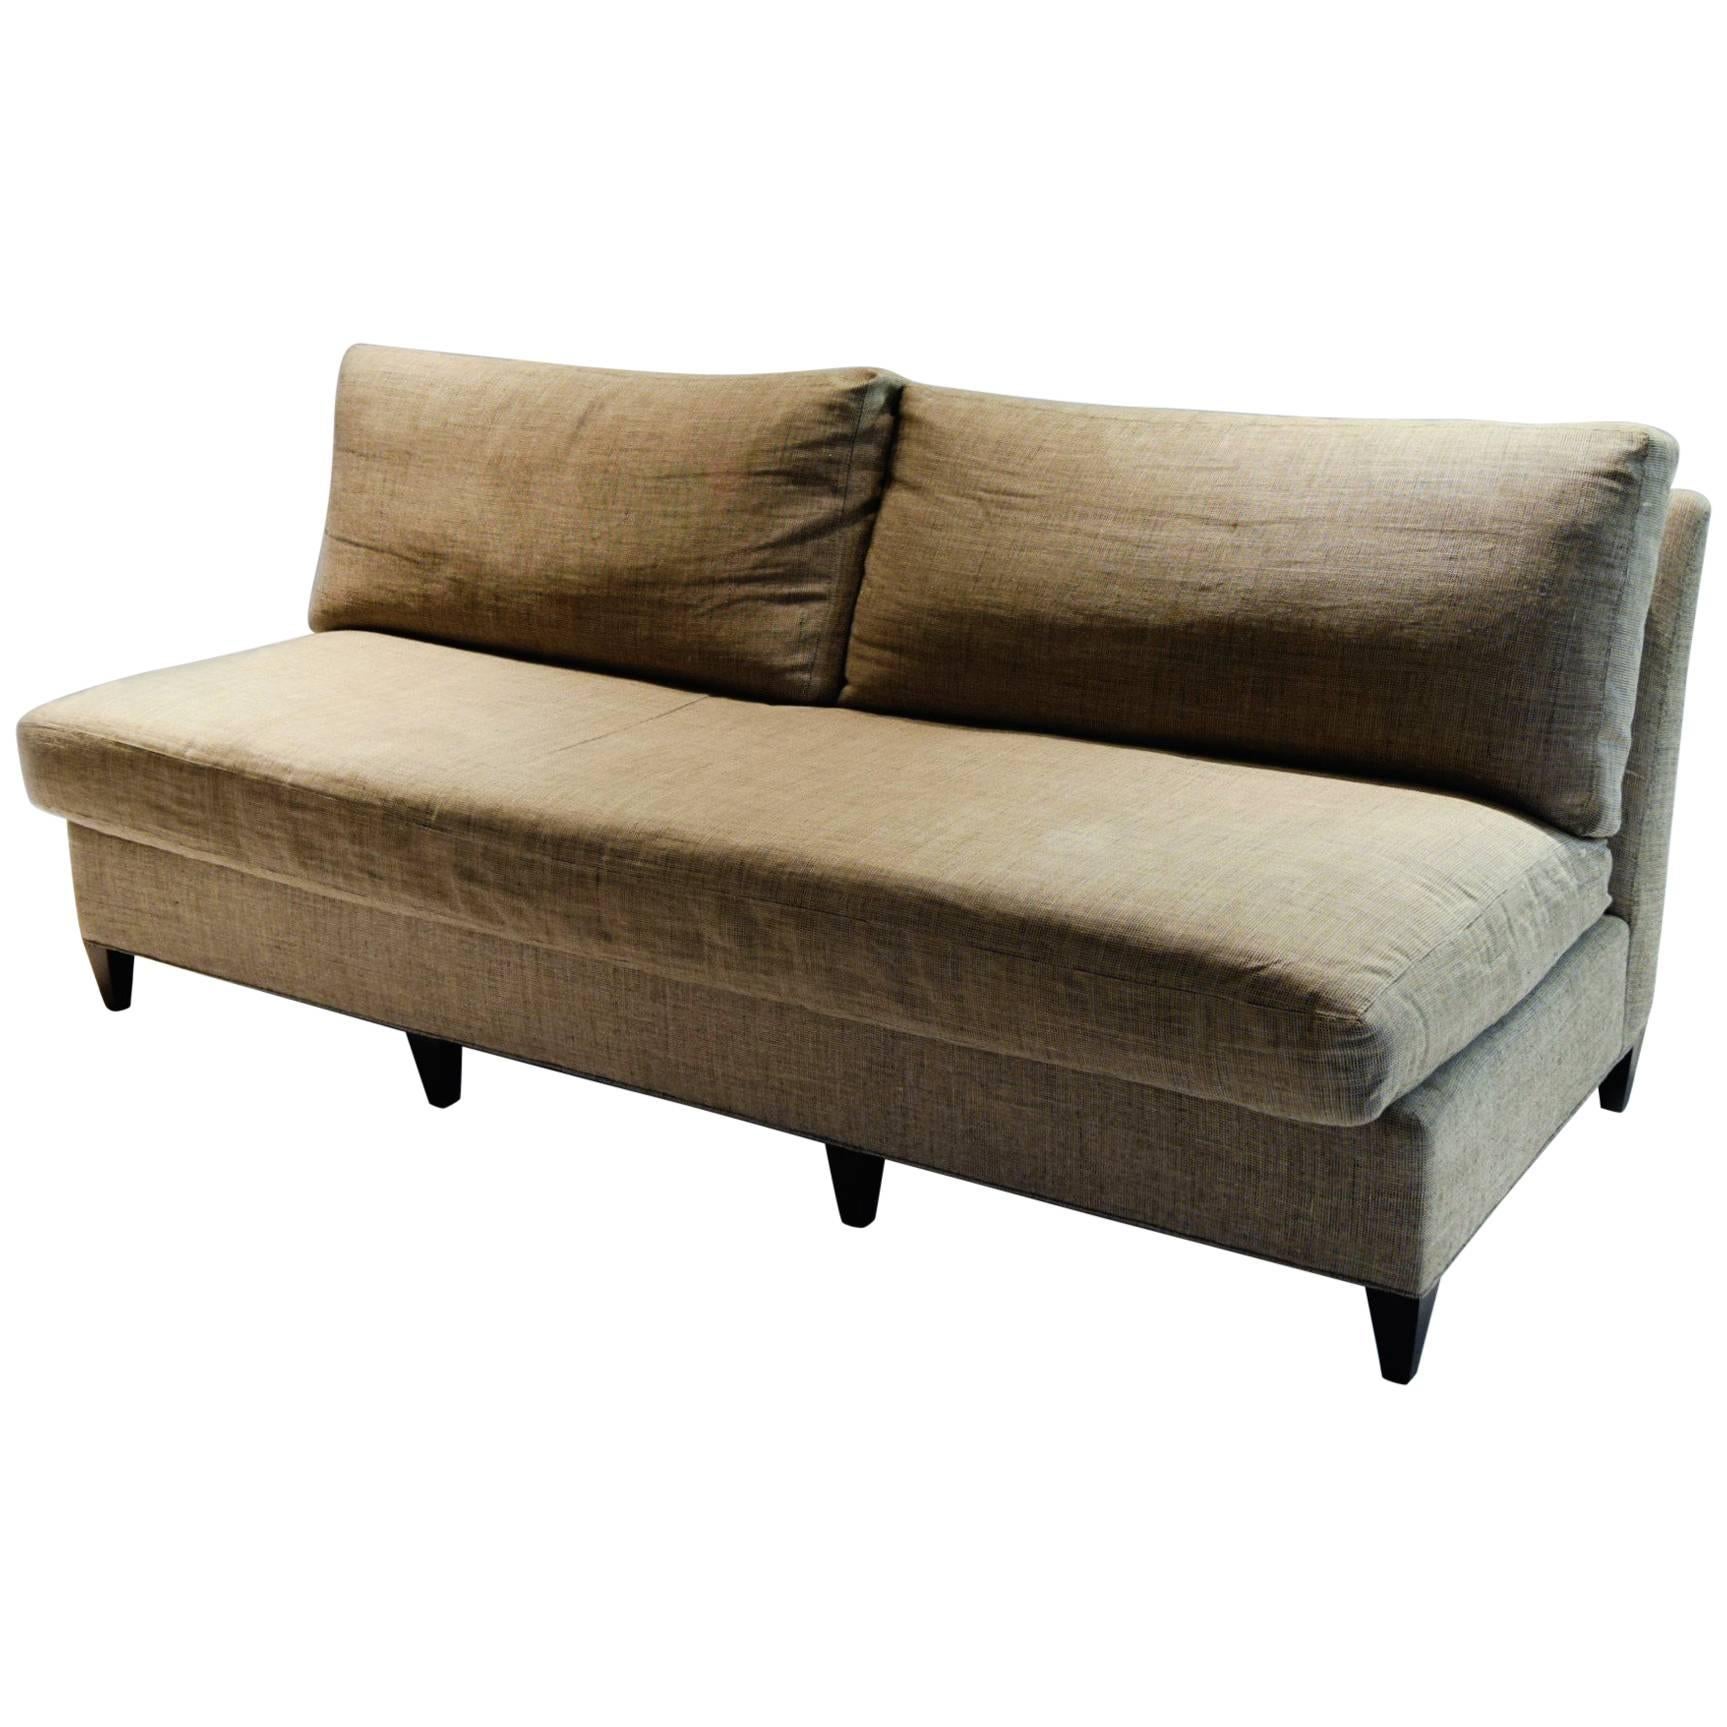 Three-Seater Sofa Upholstered in Linen, Designed by Suzanne Kasler 2006